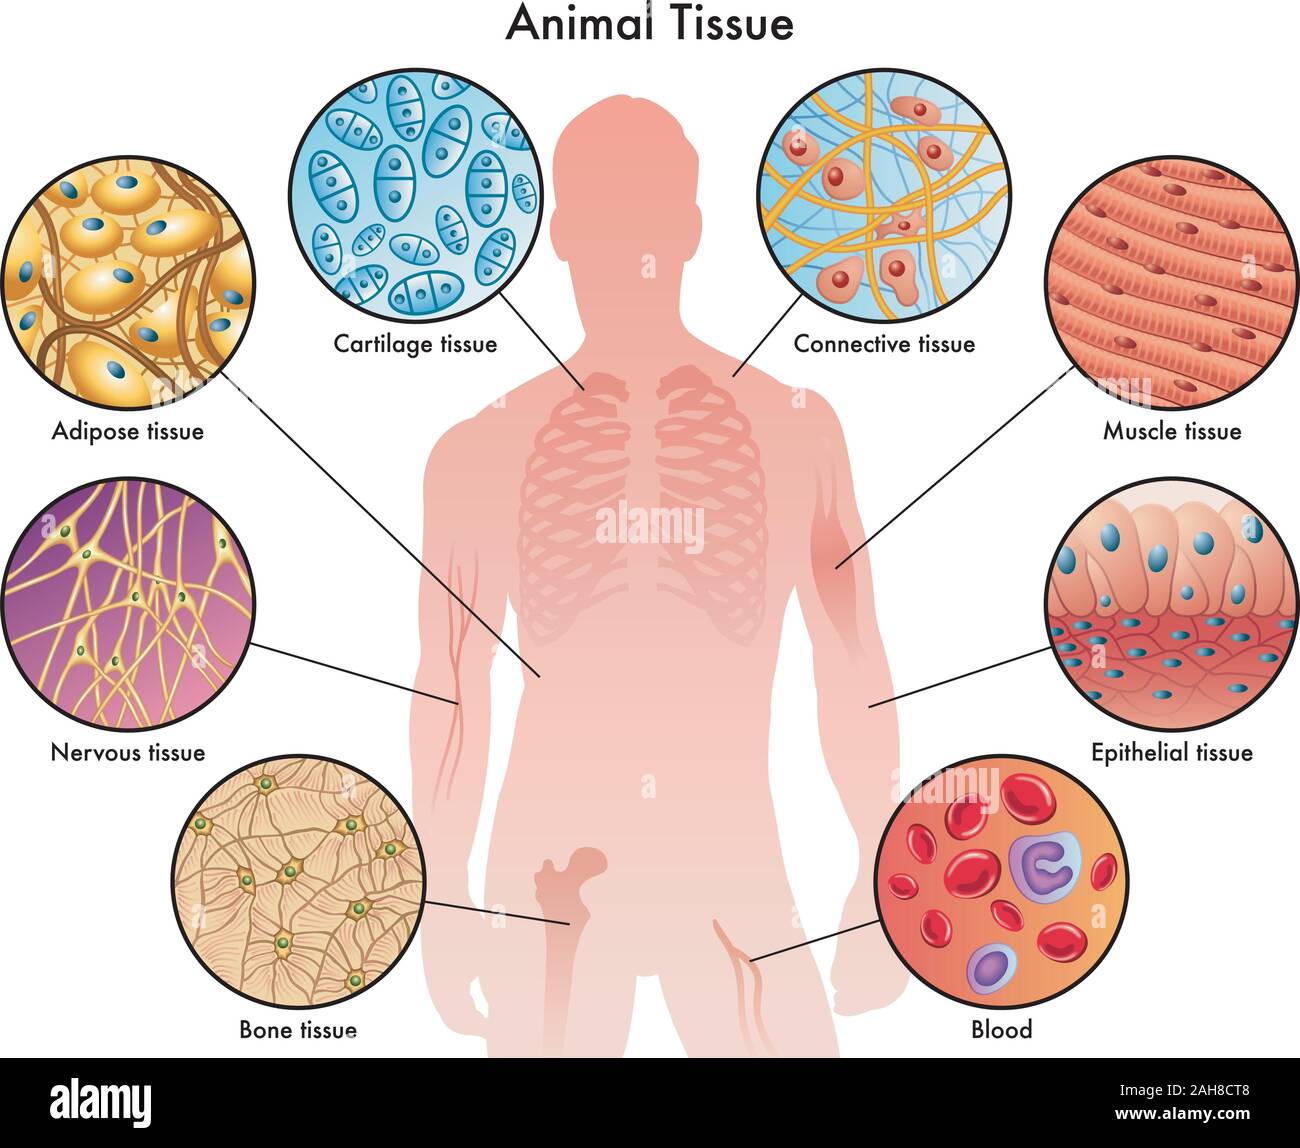 Medical illustration of the various animal tissues. Stock Vector